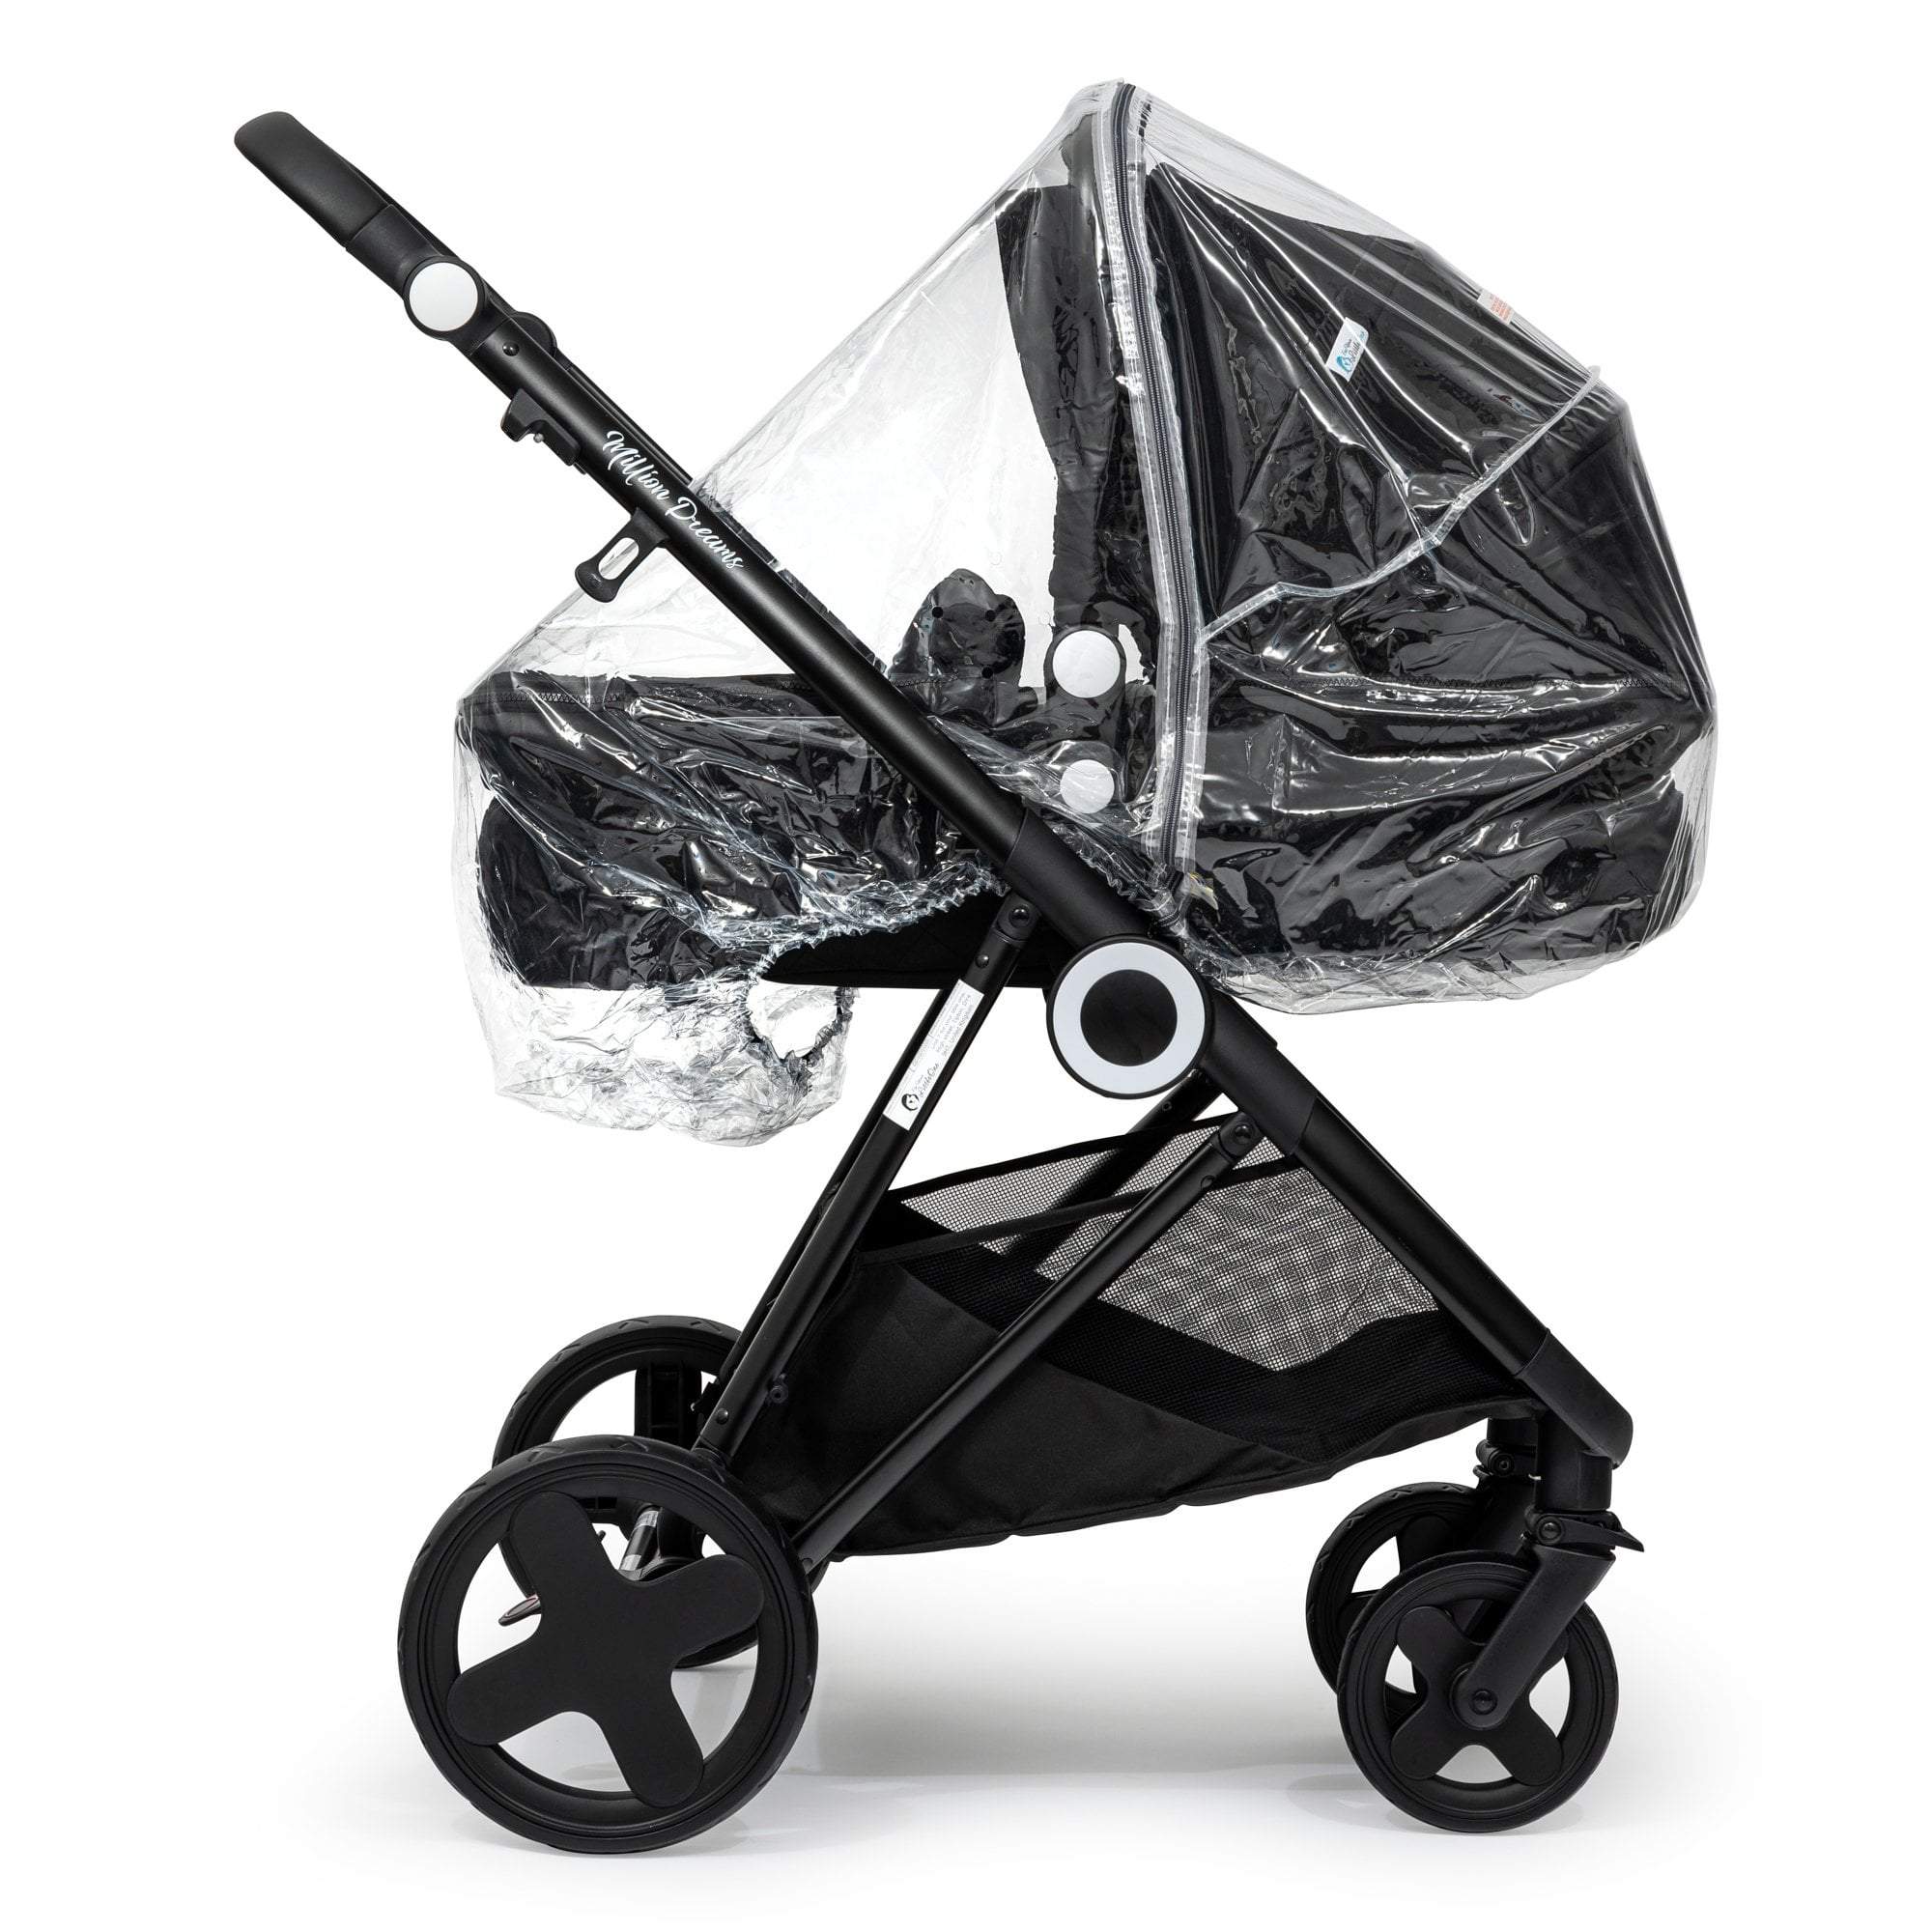 Carrycot Raincover Compatible With Bebe 9 - Fits All Models - For Your Little One